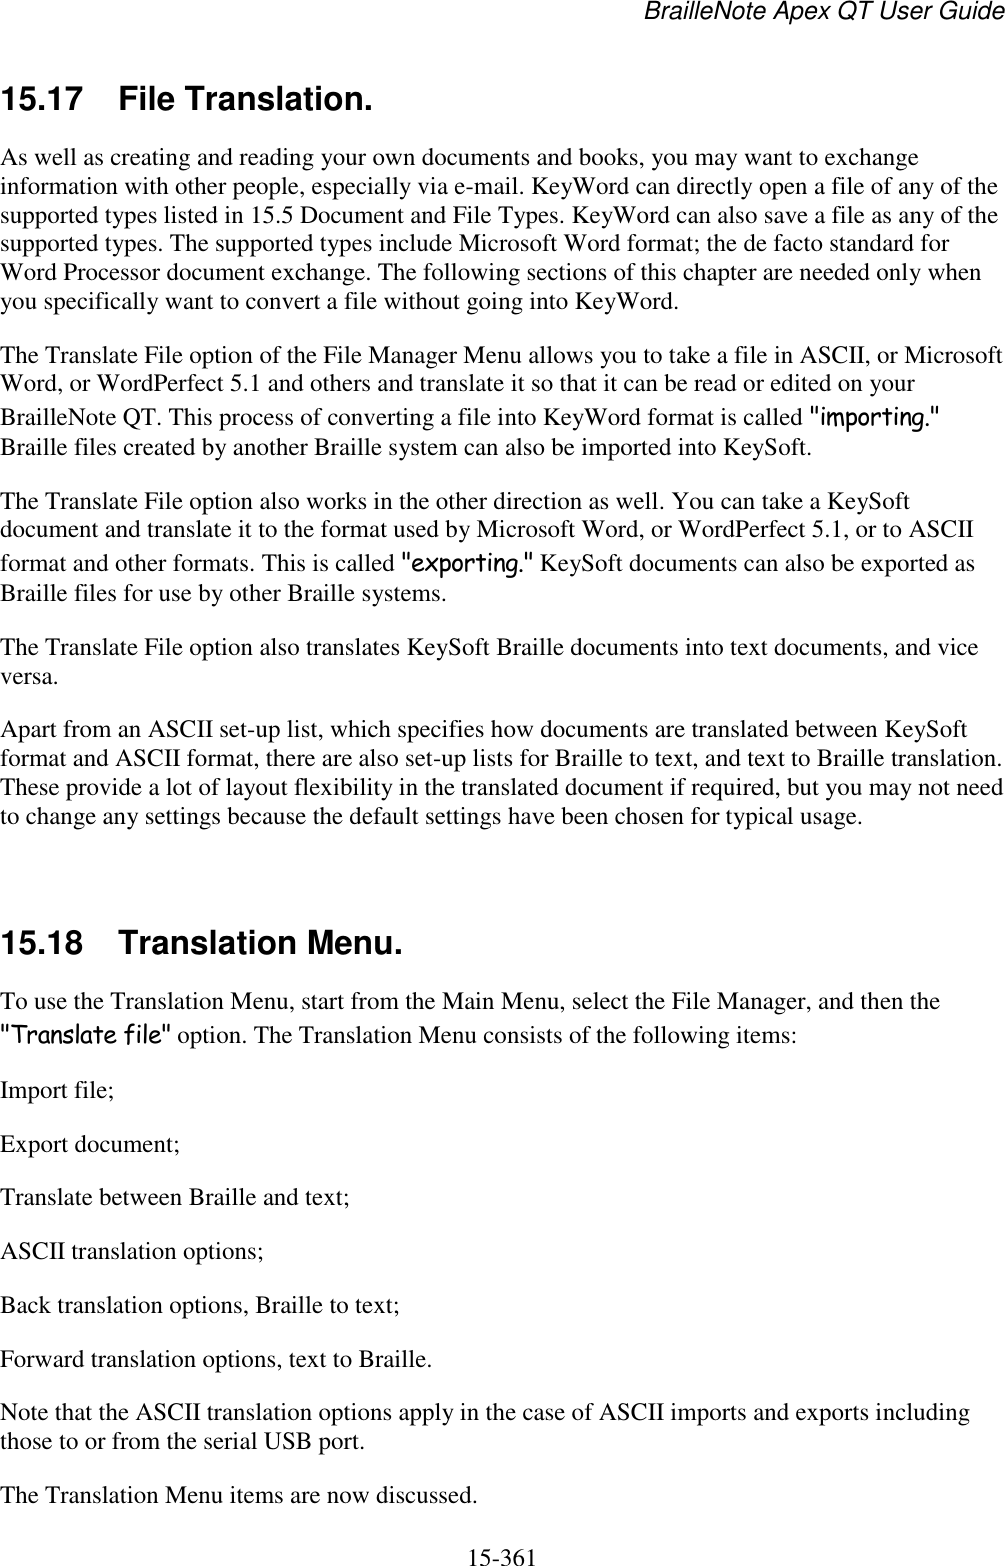 BrailleNote Apex QT User Guide  15-361   15.17  File Translation. As well as creating and reading your own documents and books, you may want to exchange information with other people, especially via e-mail. KeyWord can directly open a file of any of the supported types listed in 15.5 Document and File Types. KeyWord can also save a file as any of the supported types. The supported types include Microsoft Word format; the de facto standard for Word Processor document exchange. The following sections of this chapter are needed only when you specifically want to convert a file without going into KeyWord. The Translate File option of the File Manager Menu allows you to take a file in ASCII, or Microsoft Word, or WordPerfect 5.1 and others and translate it so that it can be read or edited on your BrailleNote QT. This process of converting a file into KeyWord format is called &quot;importing.&quot; Braille files created by another Braille system can also be imported into KeySoft. The Translate File option also works in the other direction as well. You can take a KeySoft document and translate it to the format used by Microsoft Word, or WordPerfect 5.1, or to ASCII format and other formats. This is called &quot;exporting.&quot; KeySoft documents can also be exported as Braille files for use by other Braille systems. The Translate File option also translates KeySoft Braille documents into text documents, and vice versa. Apart from an ASCII set-up list, which specifies how documents are translated between KeySoft format and ASCII format, there are also set-up lists for Braille to text, and text to Braille translation. These provide a lot of layout flexibility in the translated document if required, but you may not need to change any settings because the default settings have been chosen for typical usage.   15.18  Translation Menu. To use the Translation Menu, start from the Main Menu, select the File Manager, and then the &quot;Translate file&quot; option. The Translation Menu consists of the following items: Import file; Export document; Translate between Braille and text; ASCII translation options; Back translation options, Braille to text; Forward translation options, text to Braille. Note that the ASCII translation options apply in the case of ASCII imports and exports including those to or from the serial USB port.  The Translation Menu items are now discussed.  